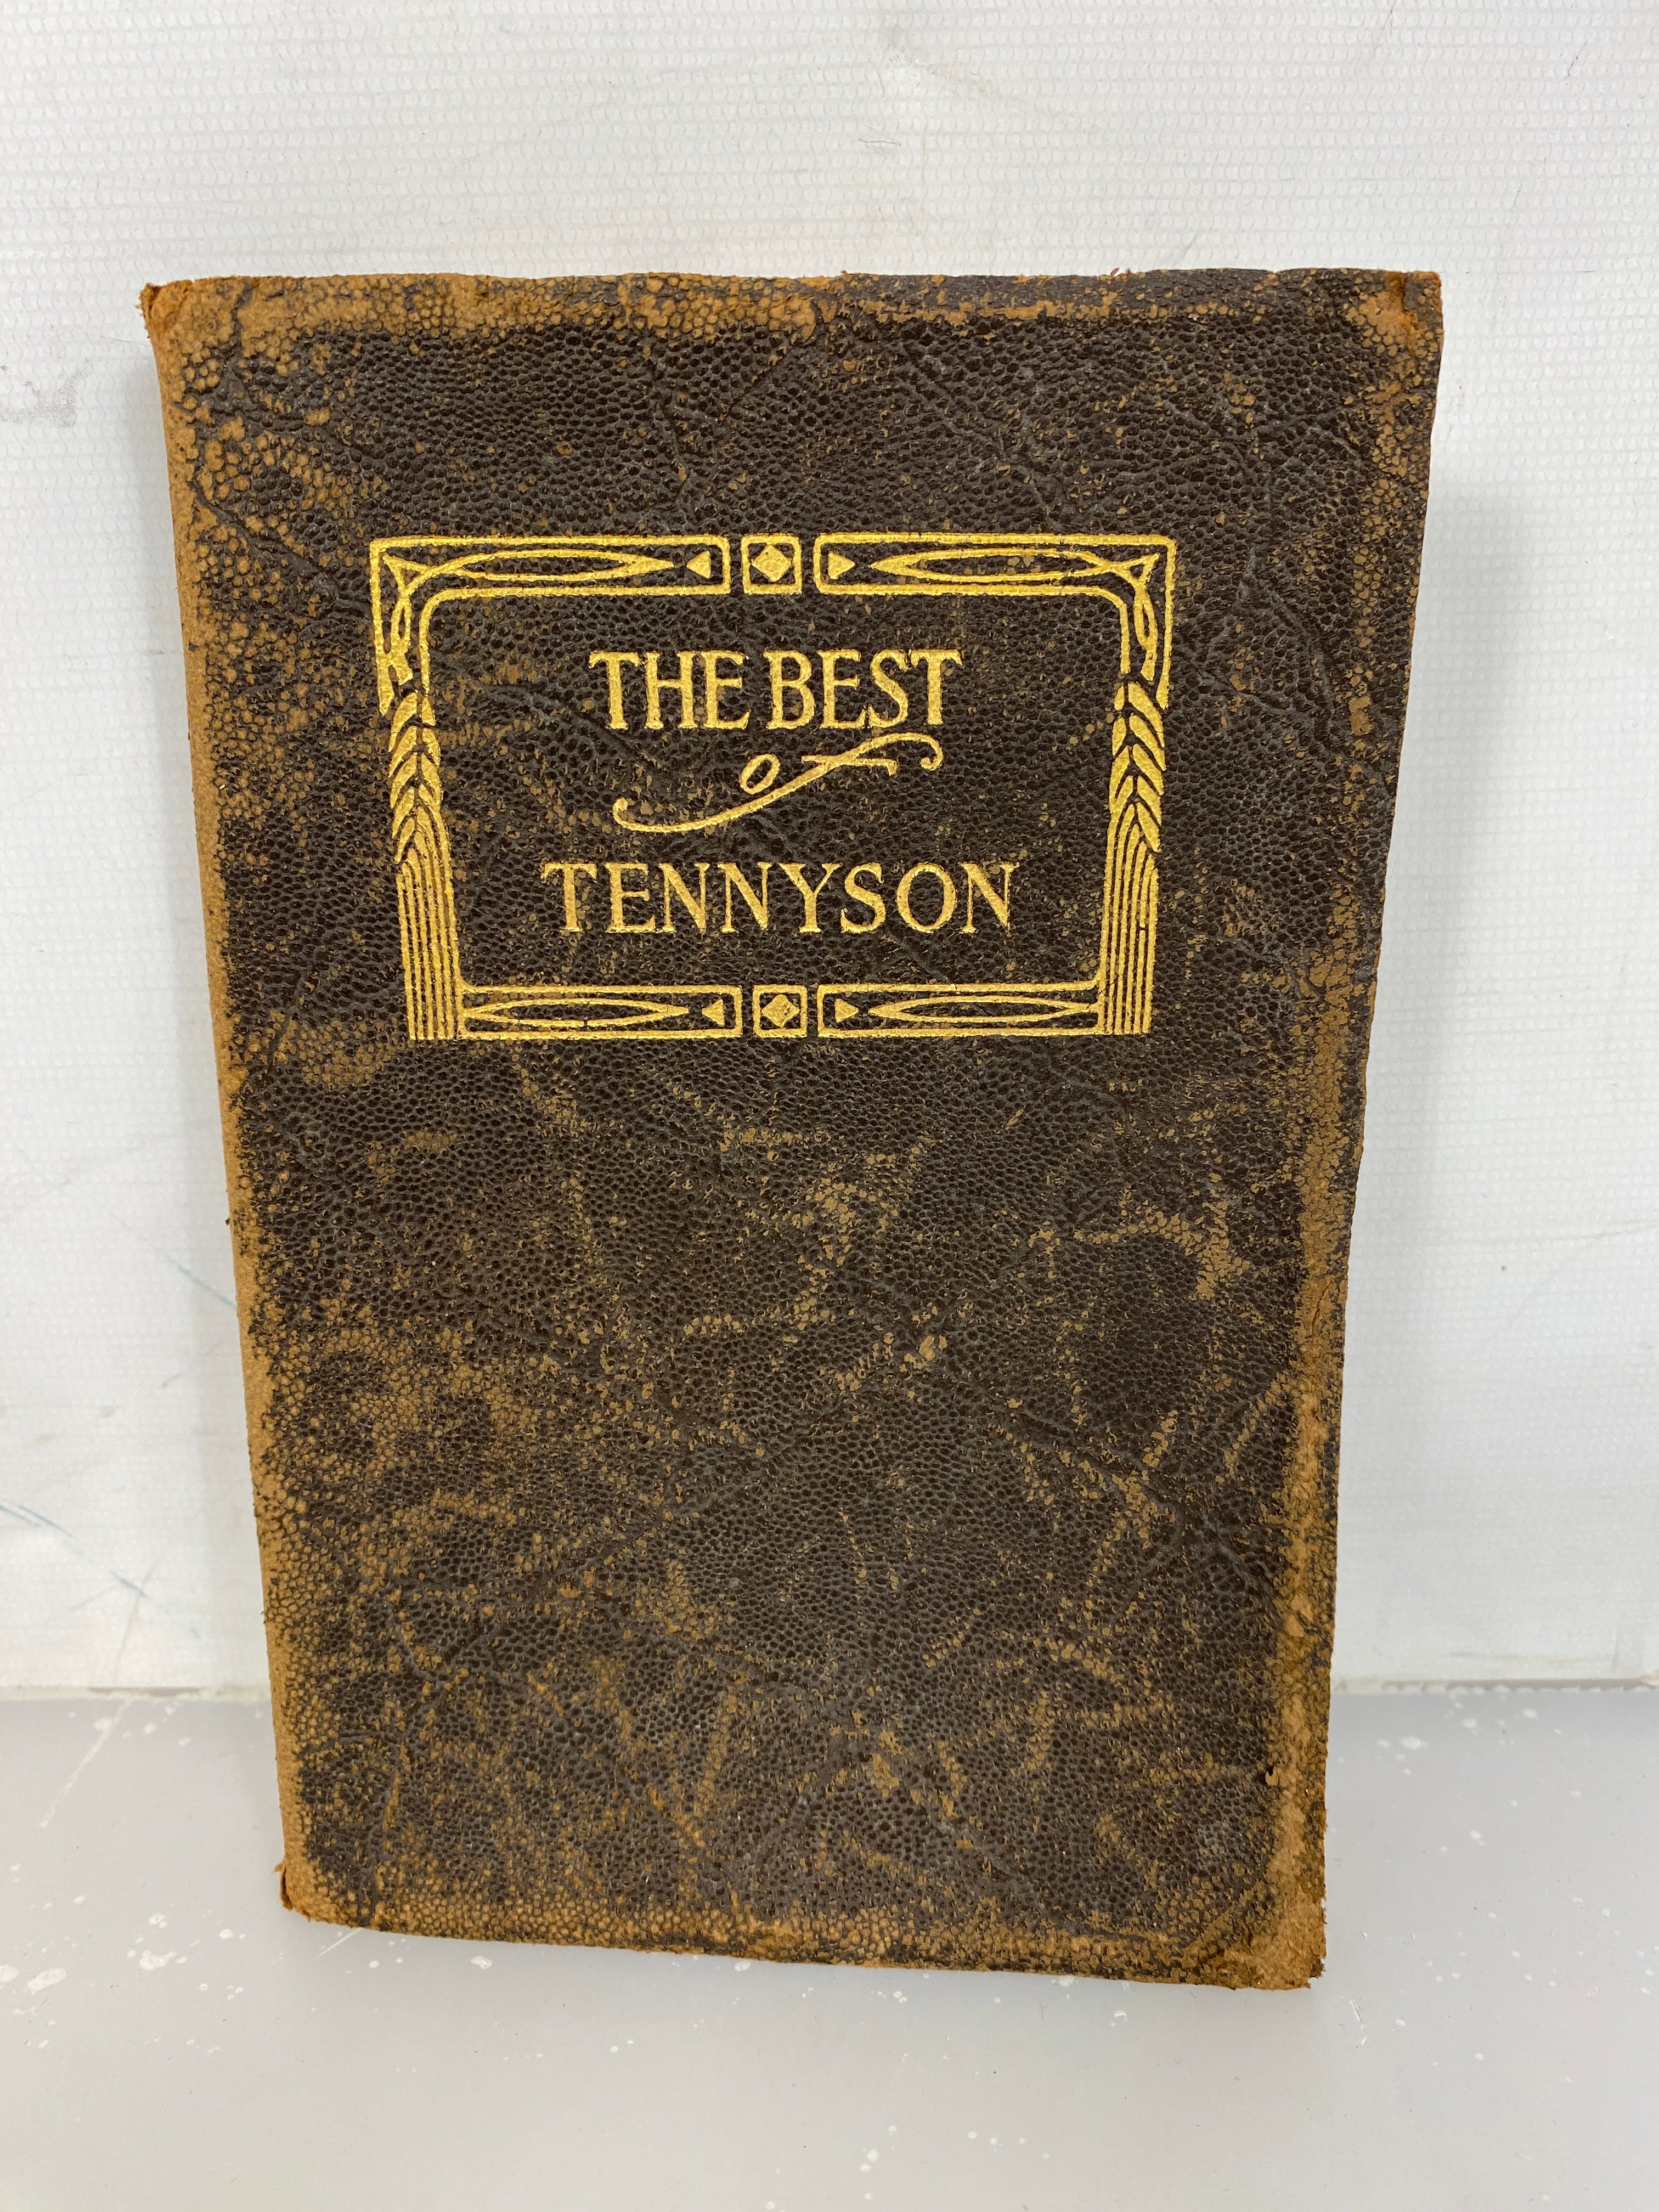 Tennyson Day by Day Anna H. Smith Thomas Y. Crowell Company 1907 Leather Bound